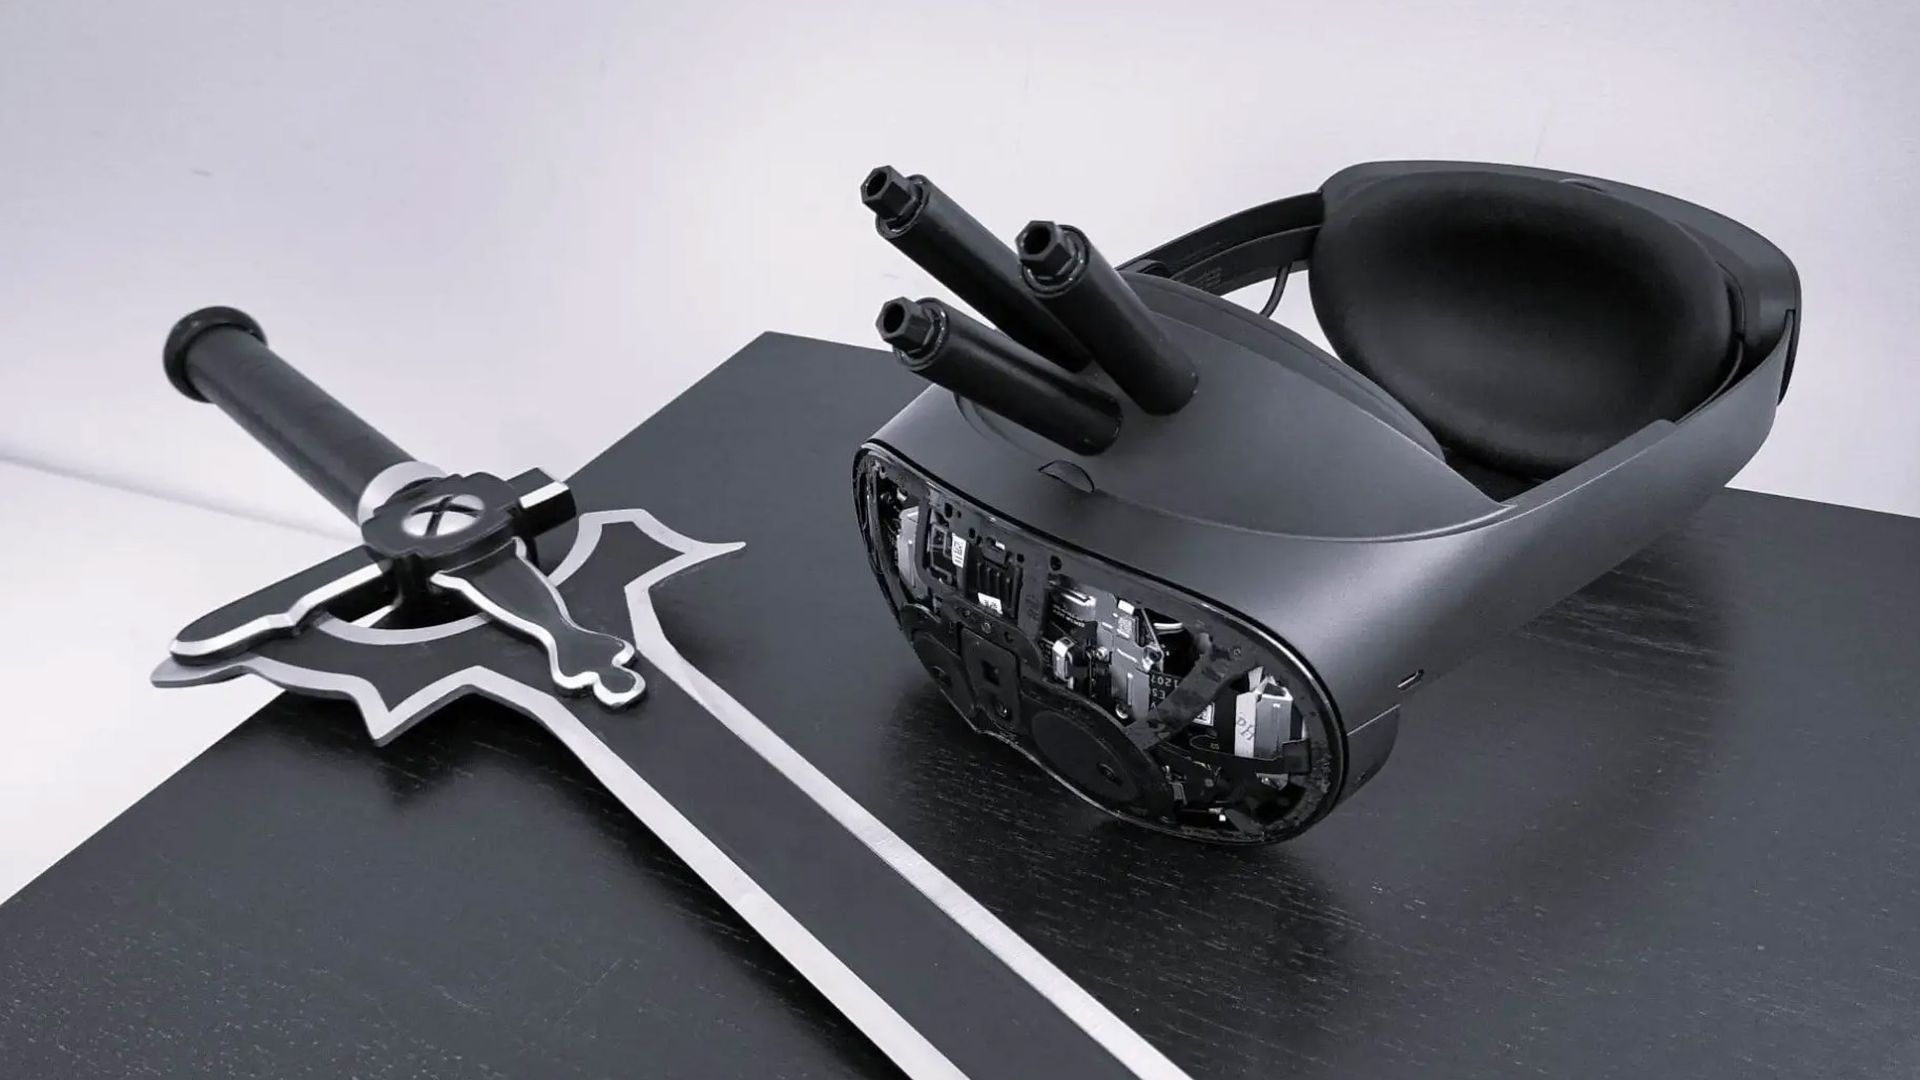 VR headset that kills you: Palmer Luckey honores Sword Art Online with his latest invention